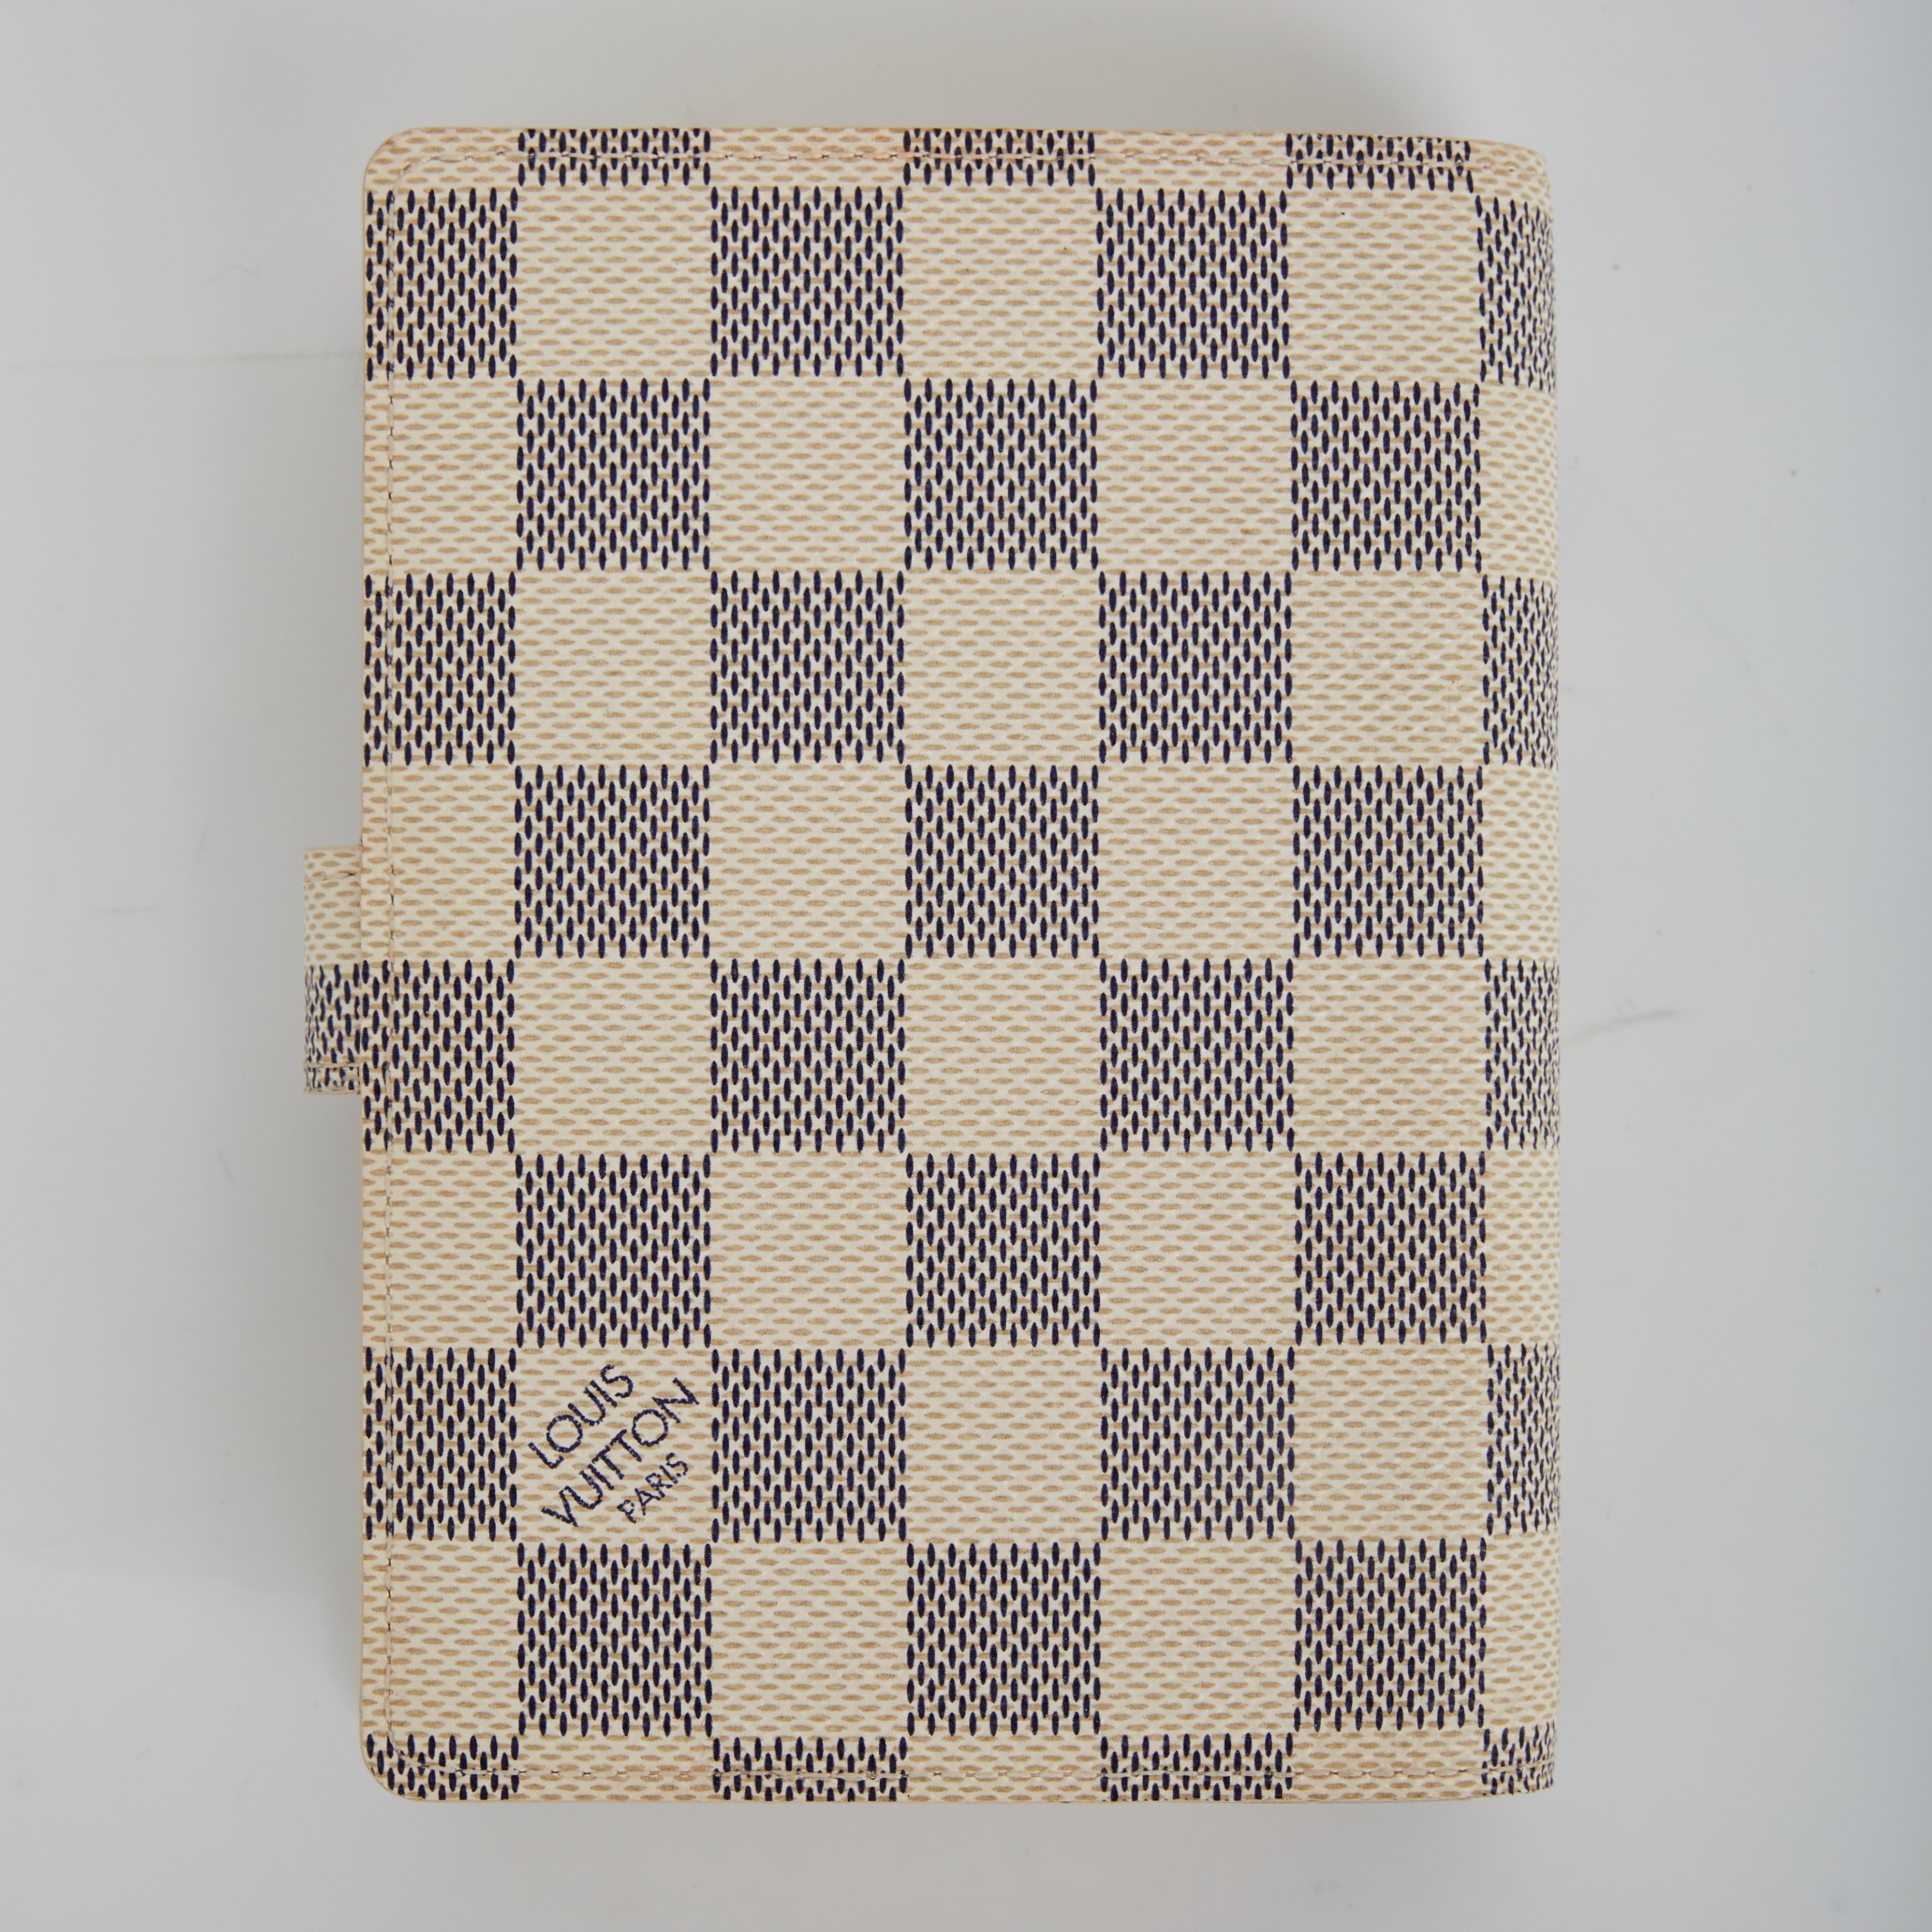 Louis Vuitton Date Book - 6 For Sale on 1stDibs